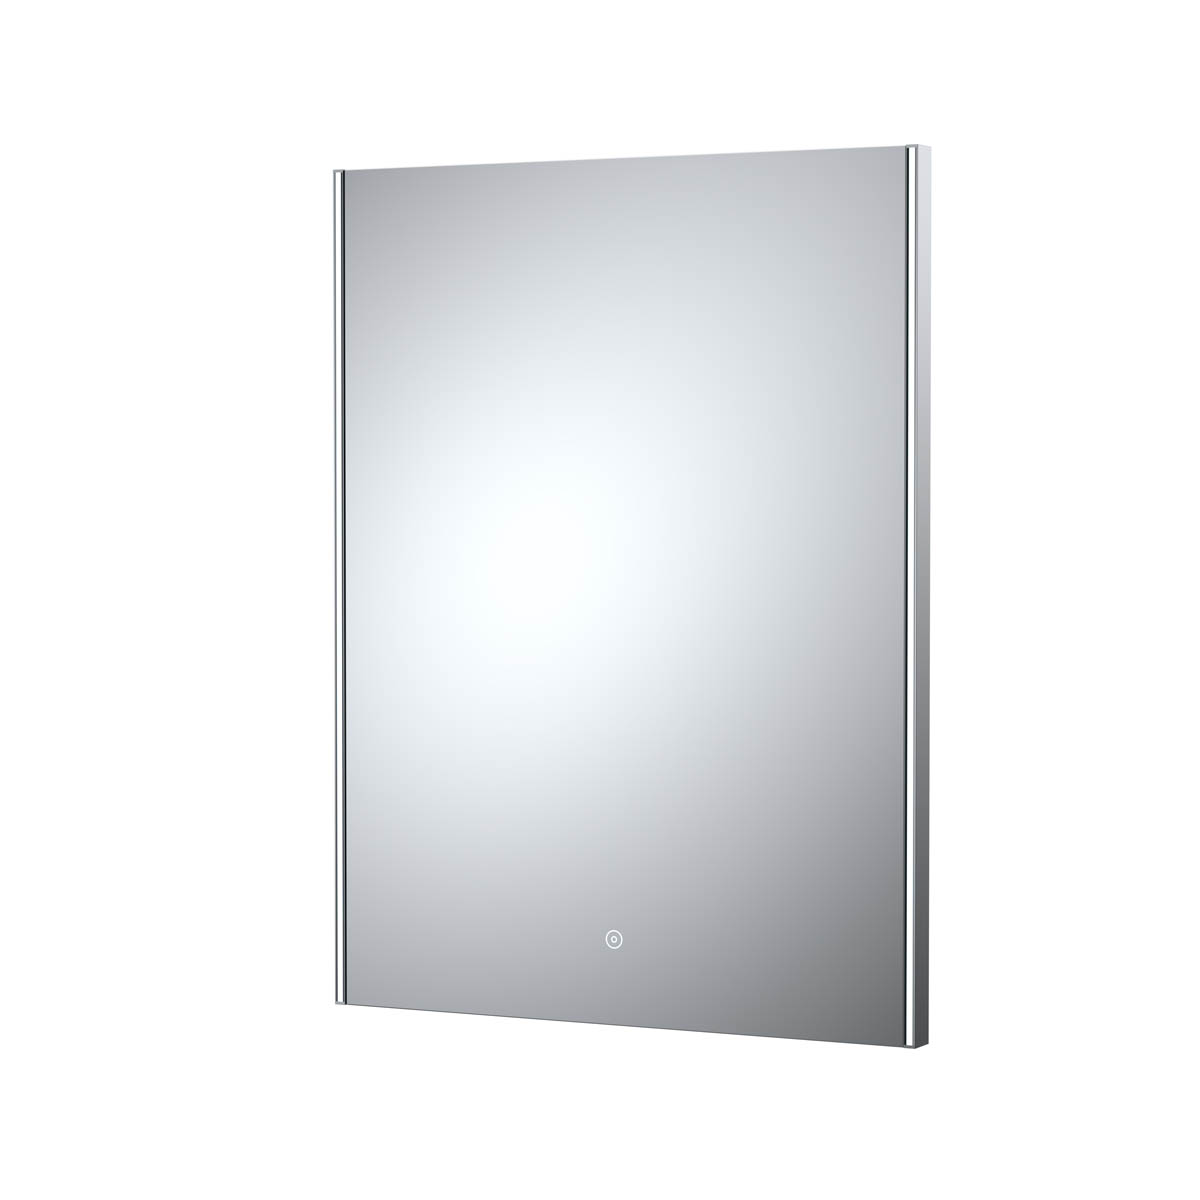 Hudson Reed 800 x 600 Ambient Touch Sensor Mirror (18804)